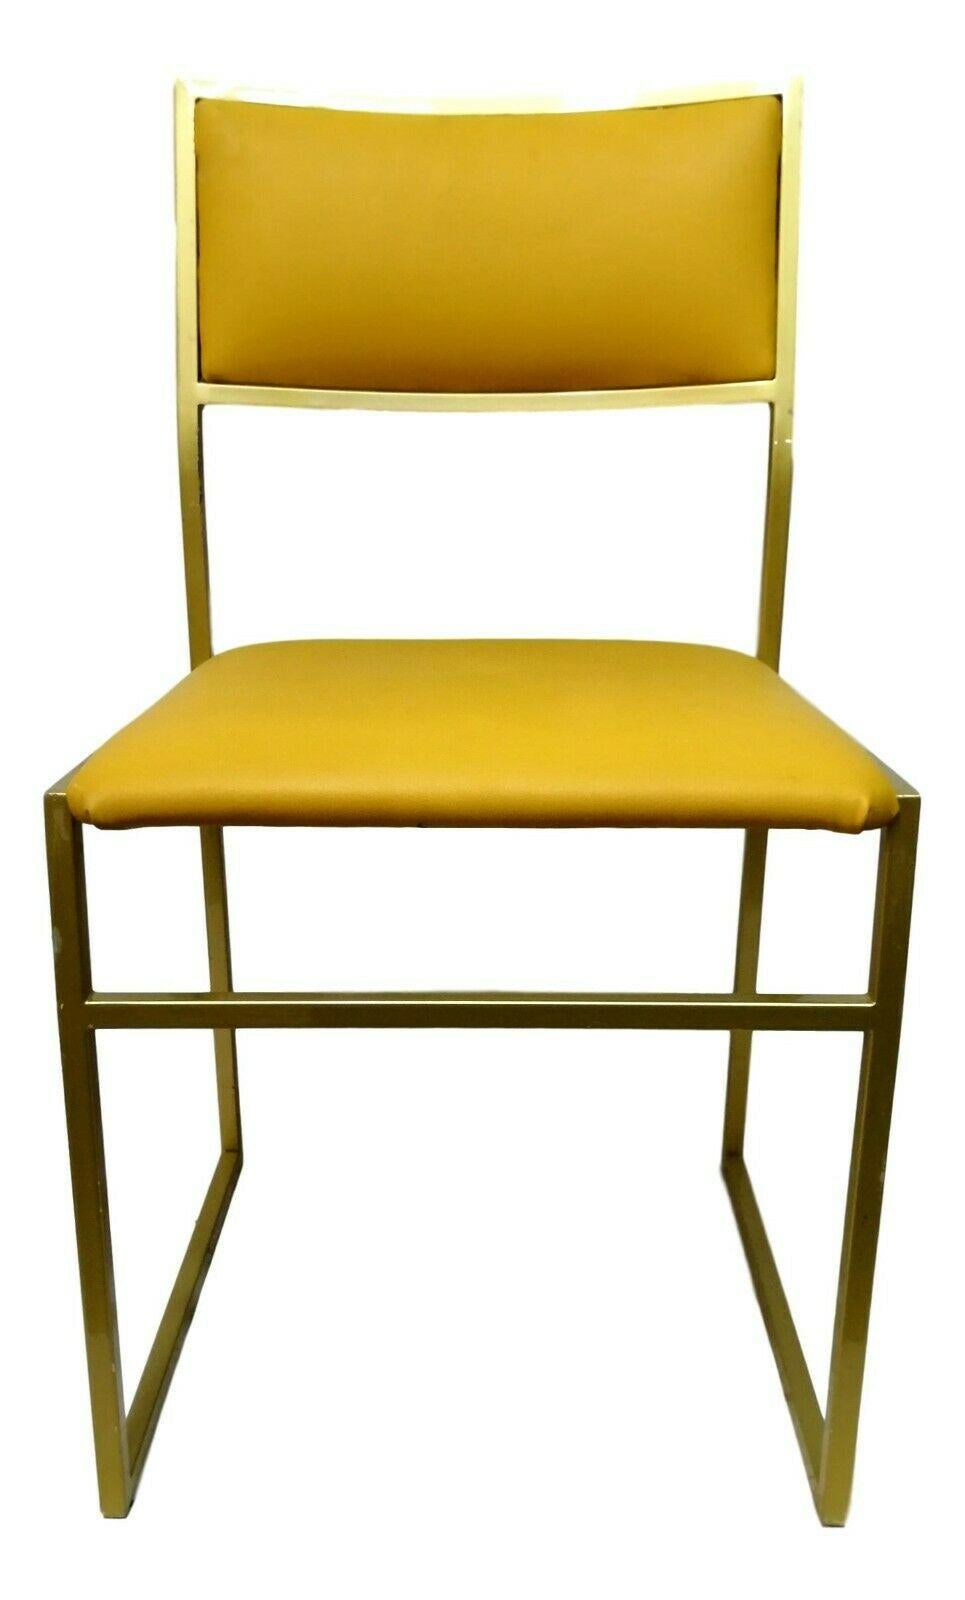 Collectible Chair in Gold Metal and Yellow Upholstery, 1970s For Sale 1